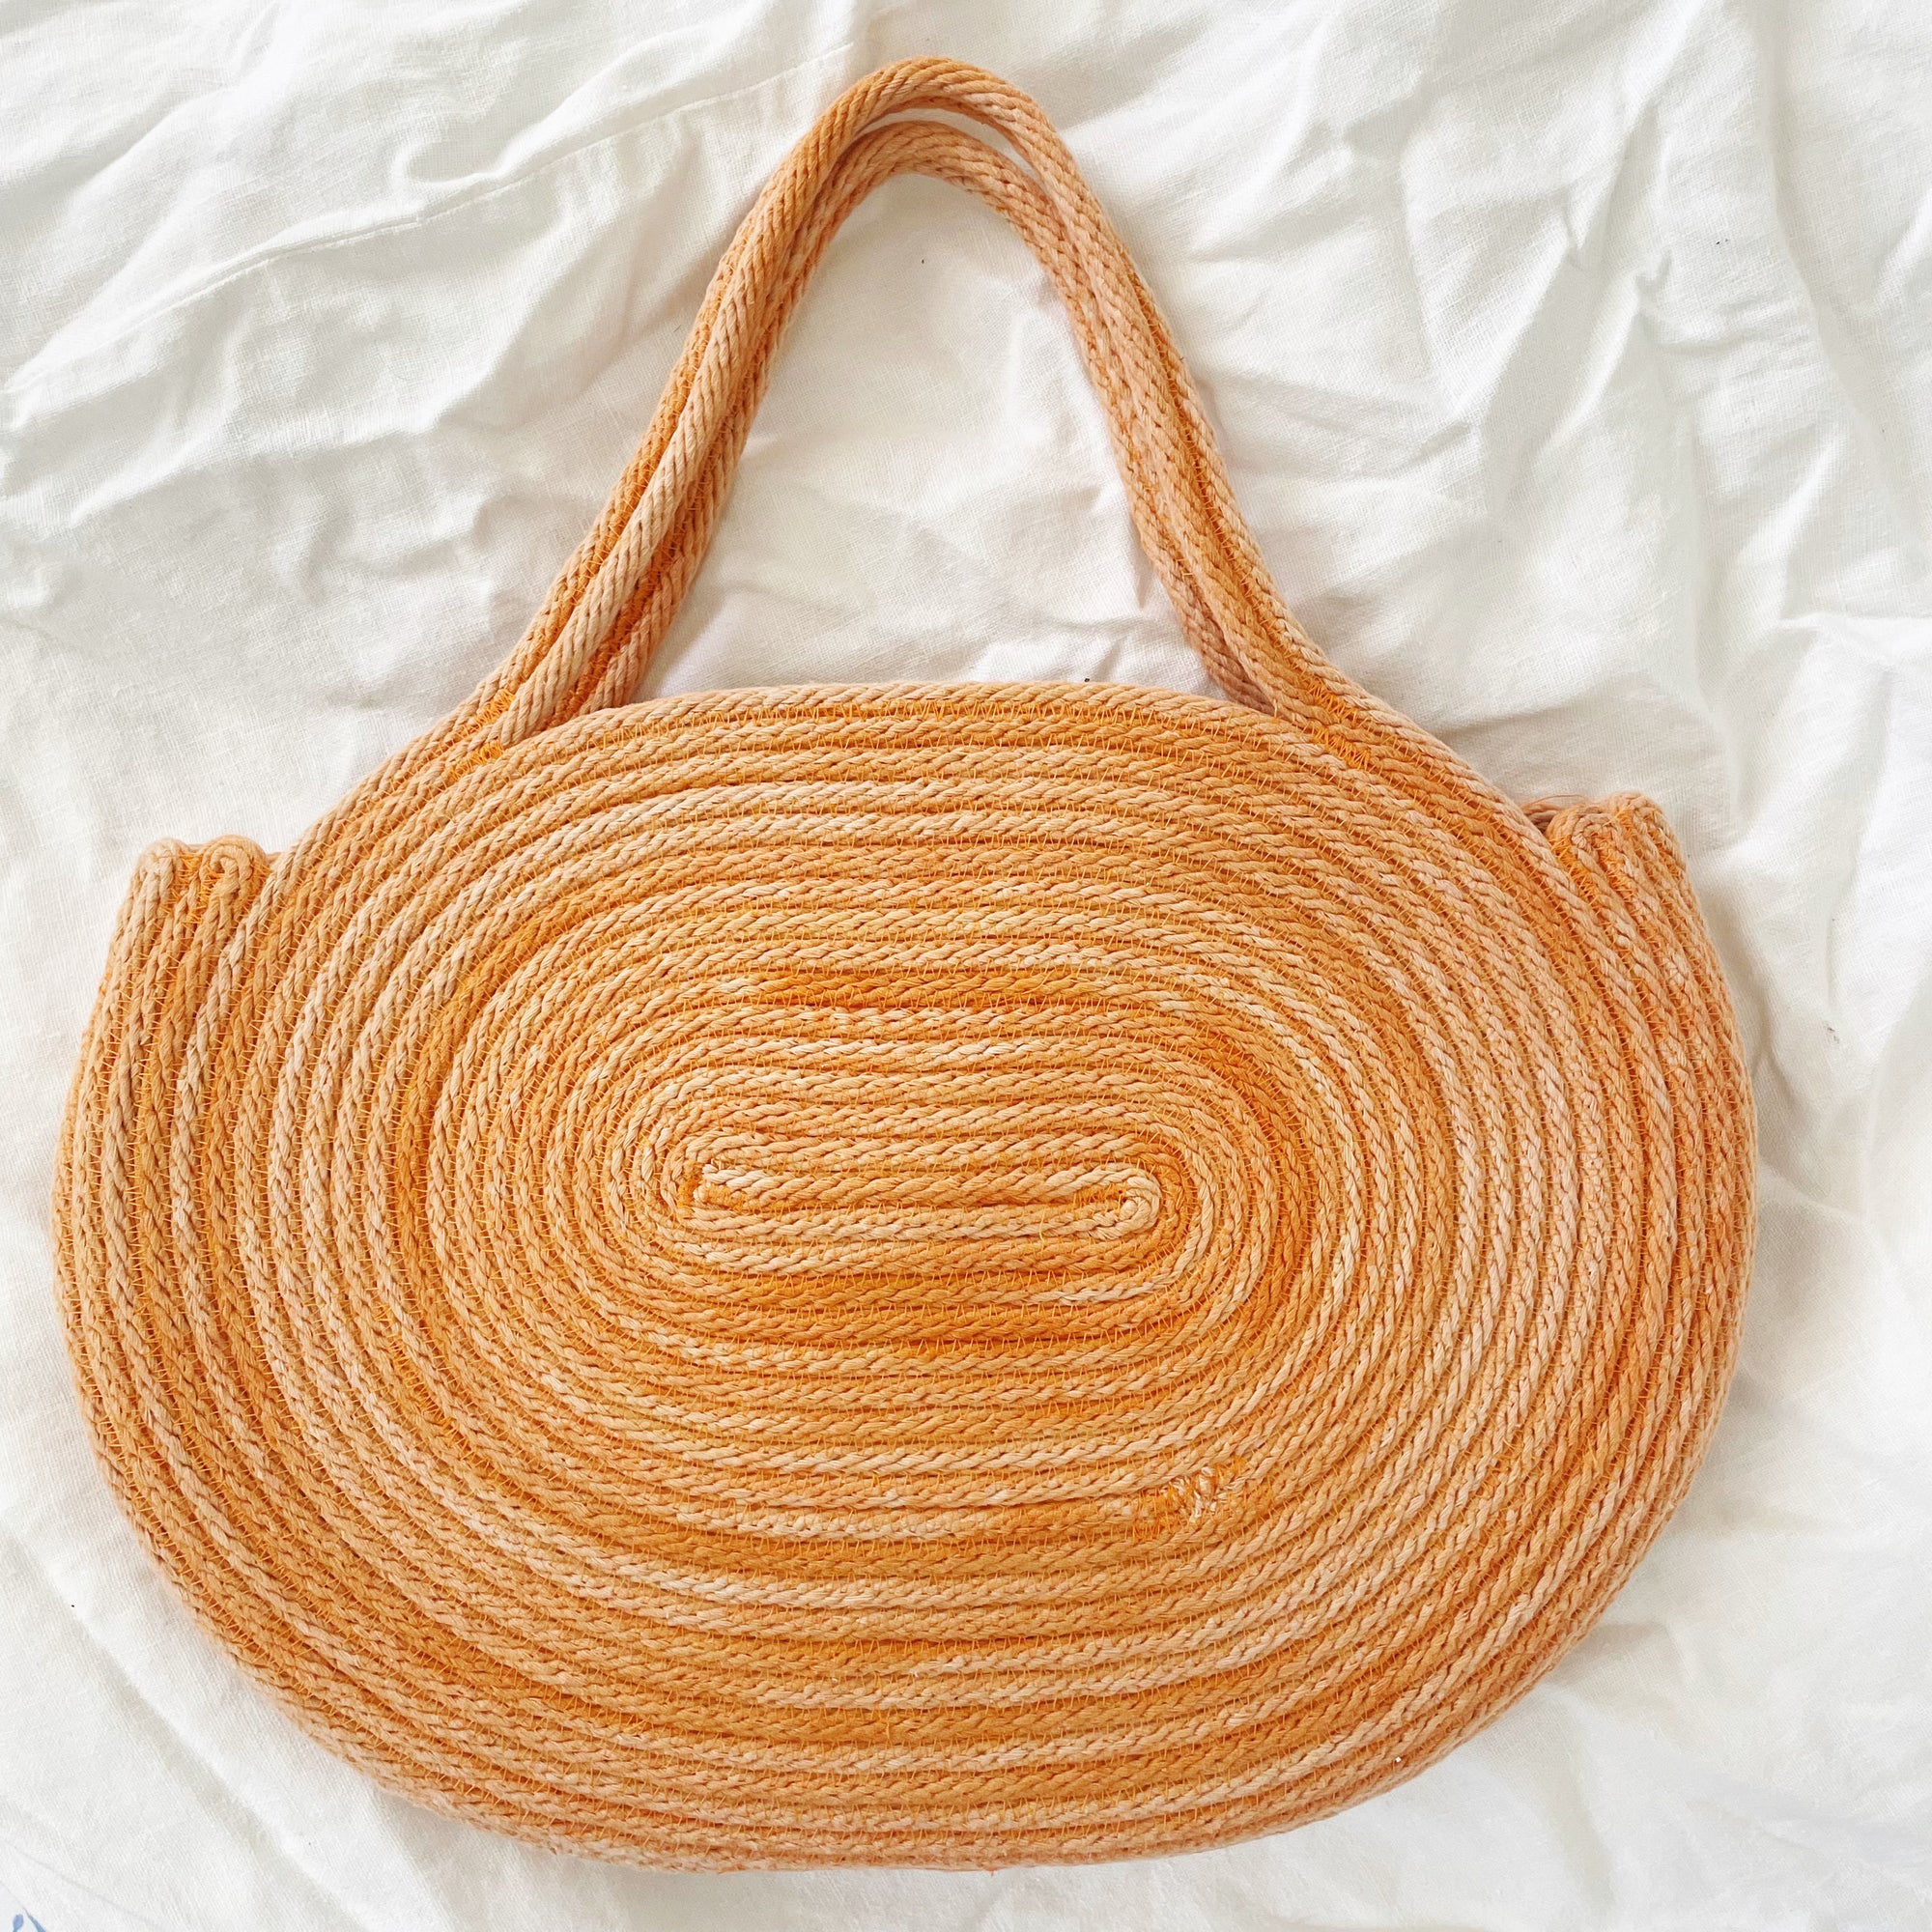 Cotton Rope Totes - Round / Oval